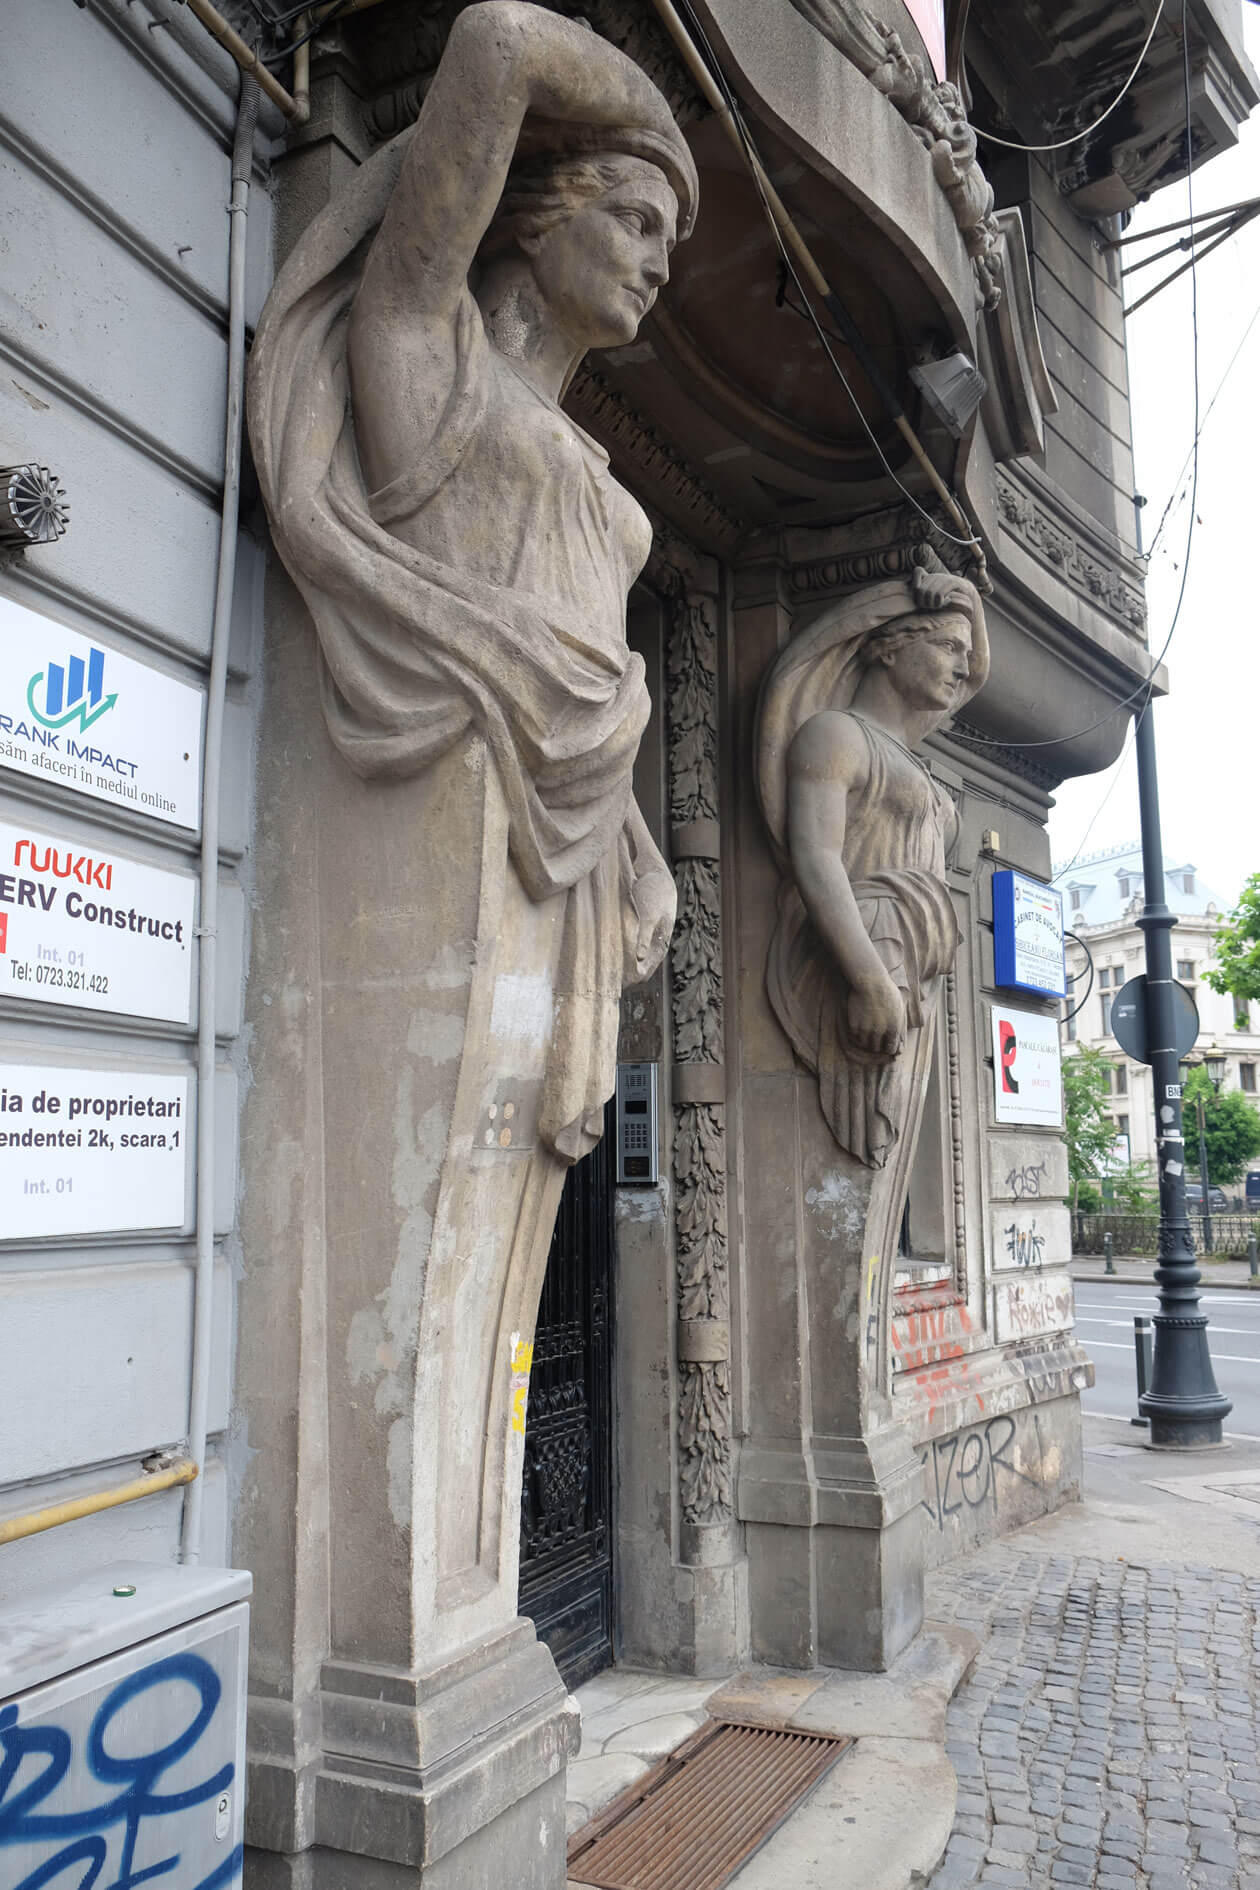 Many of the most mundane buiildings in the city centre have incredible details from the days when Bucharest was known as the "Paris of the East"